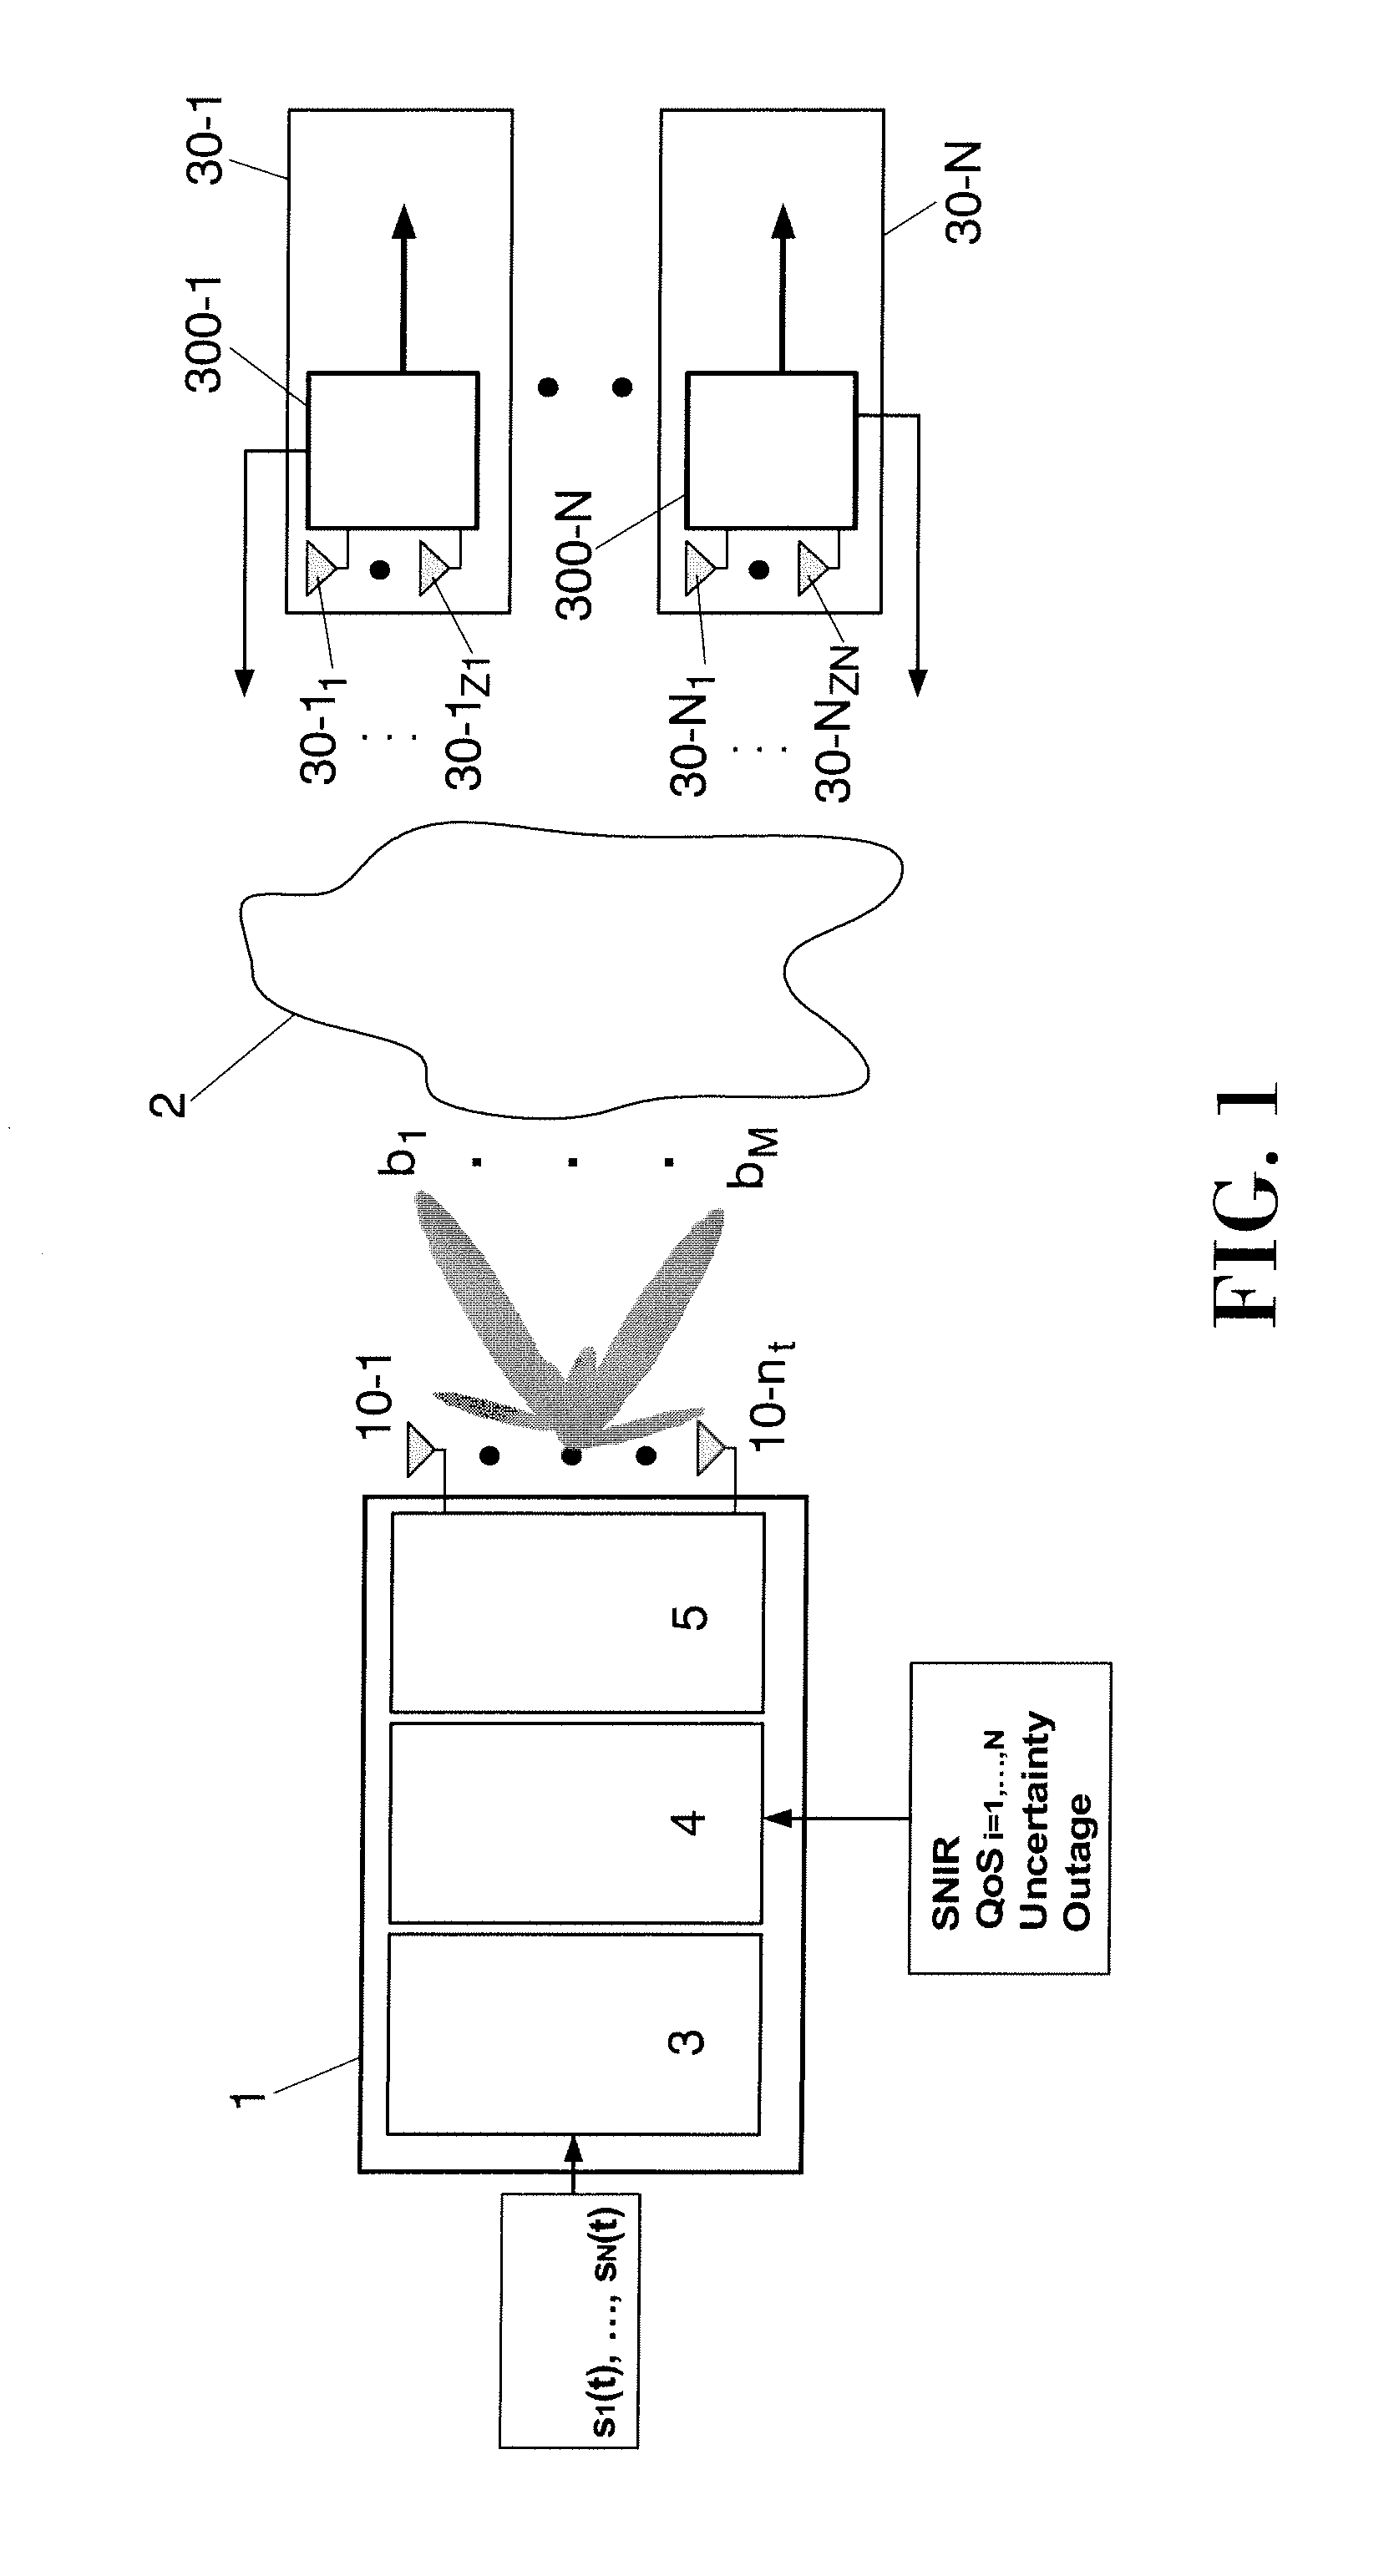 Power allocation method in multiantenna systems under partial channel knowledge